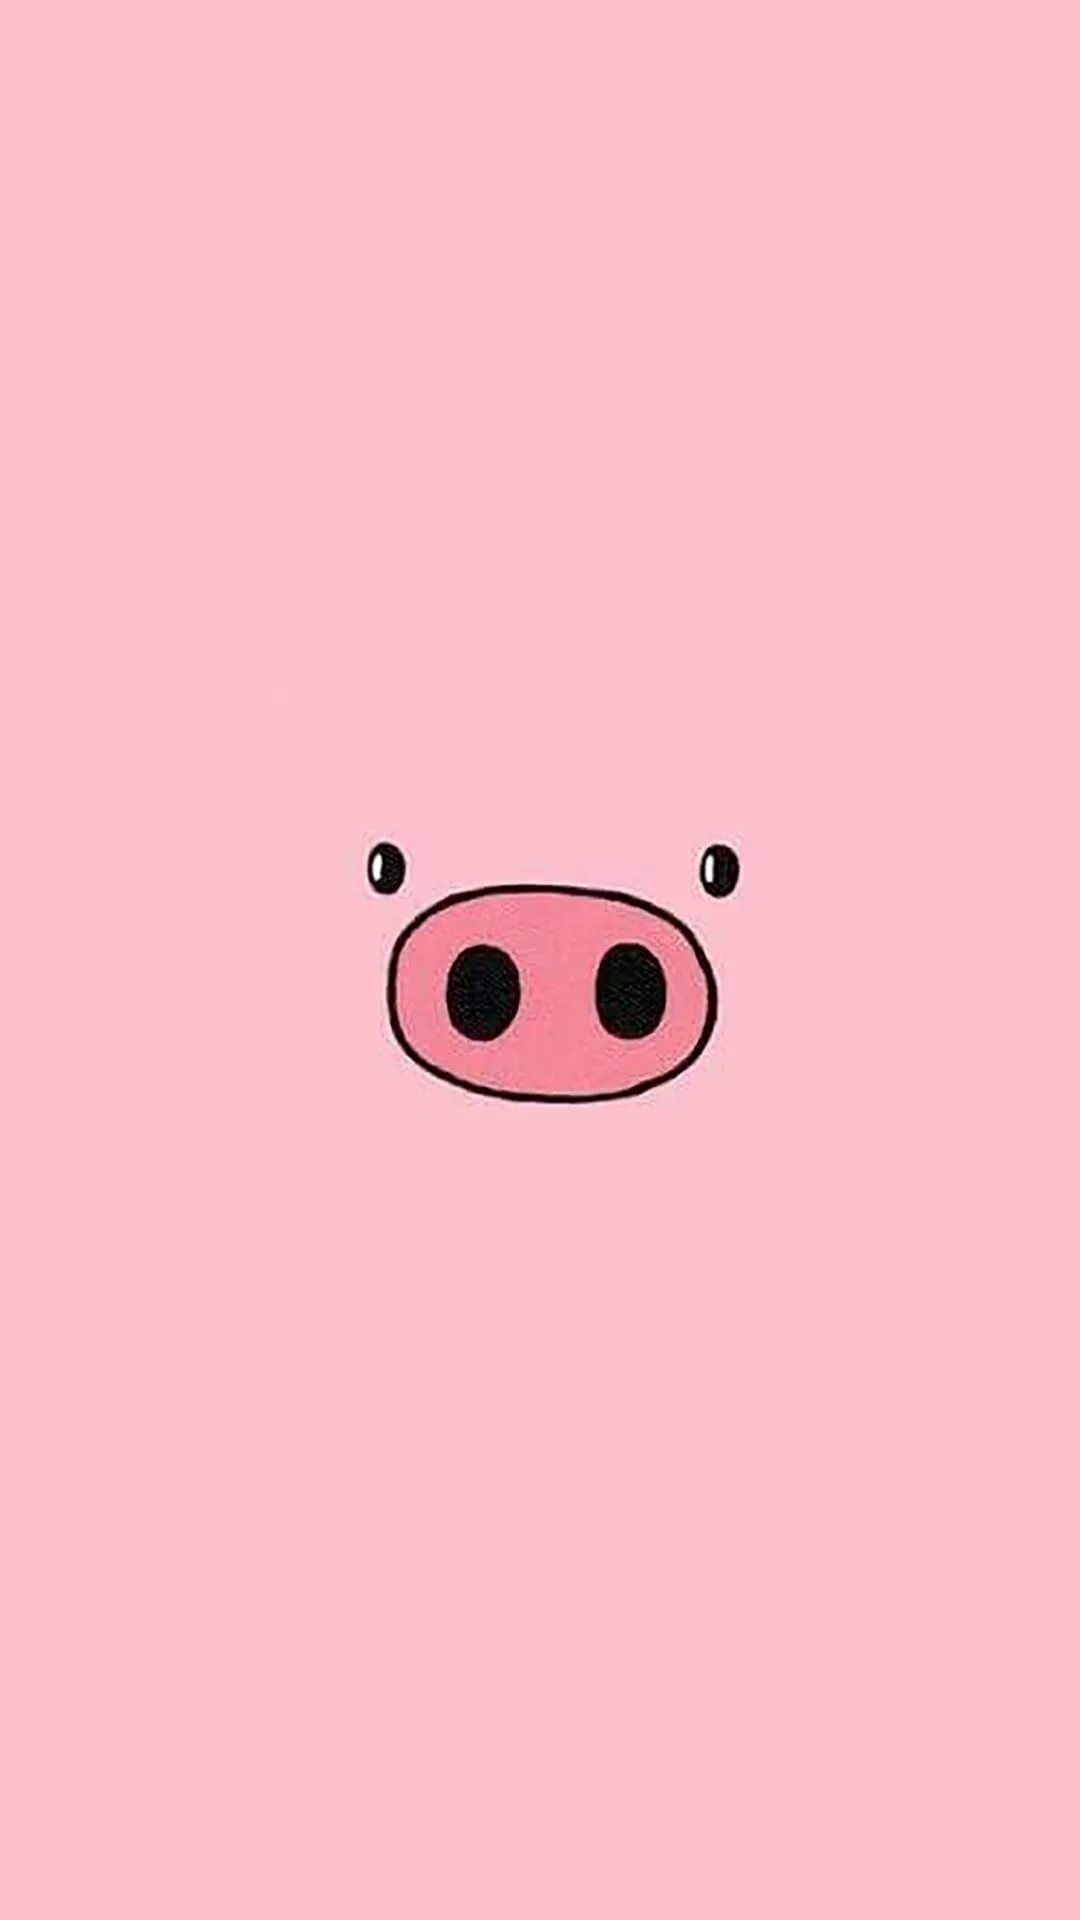 Popular pig iPhone wallpapers, Funny pig backgrounds, Piggy phone wallpapers, Cute animal wallpapers, 1080x1920 Full HD Handy